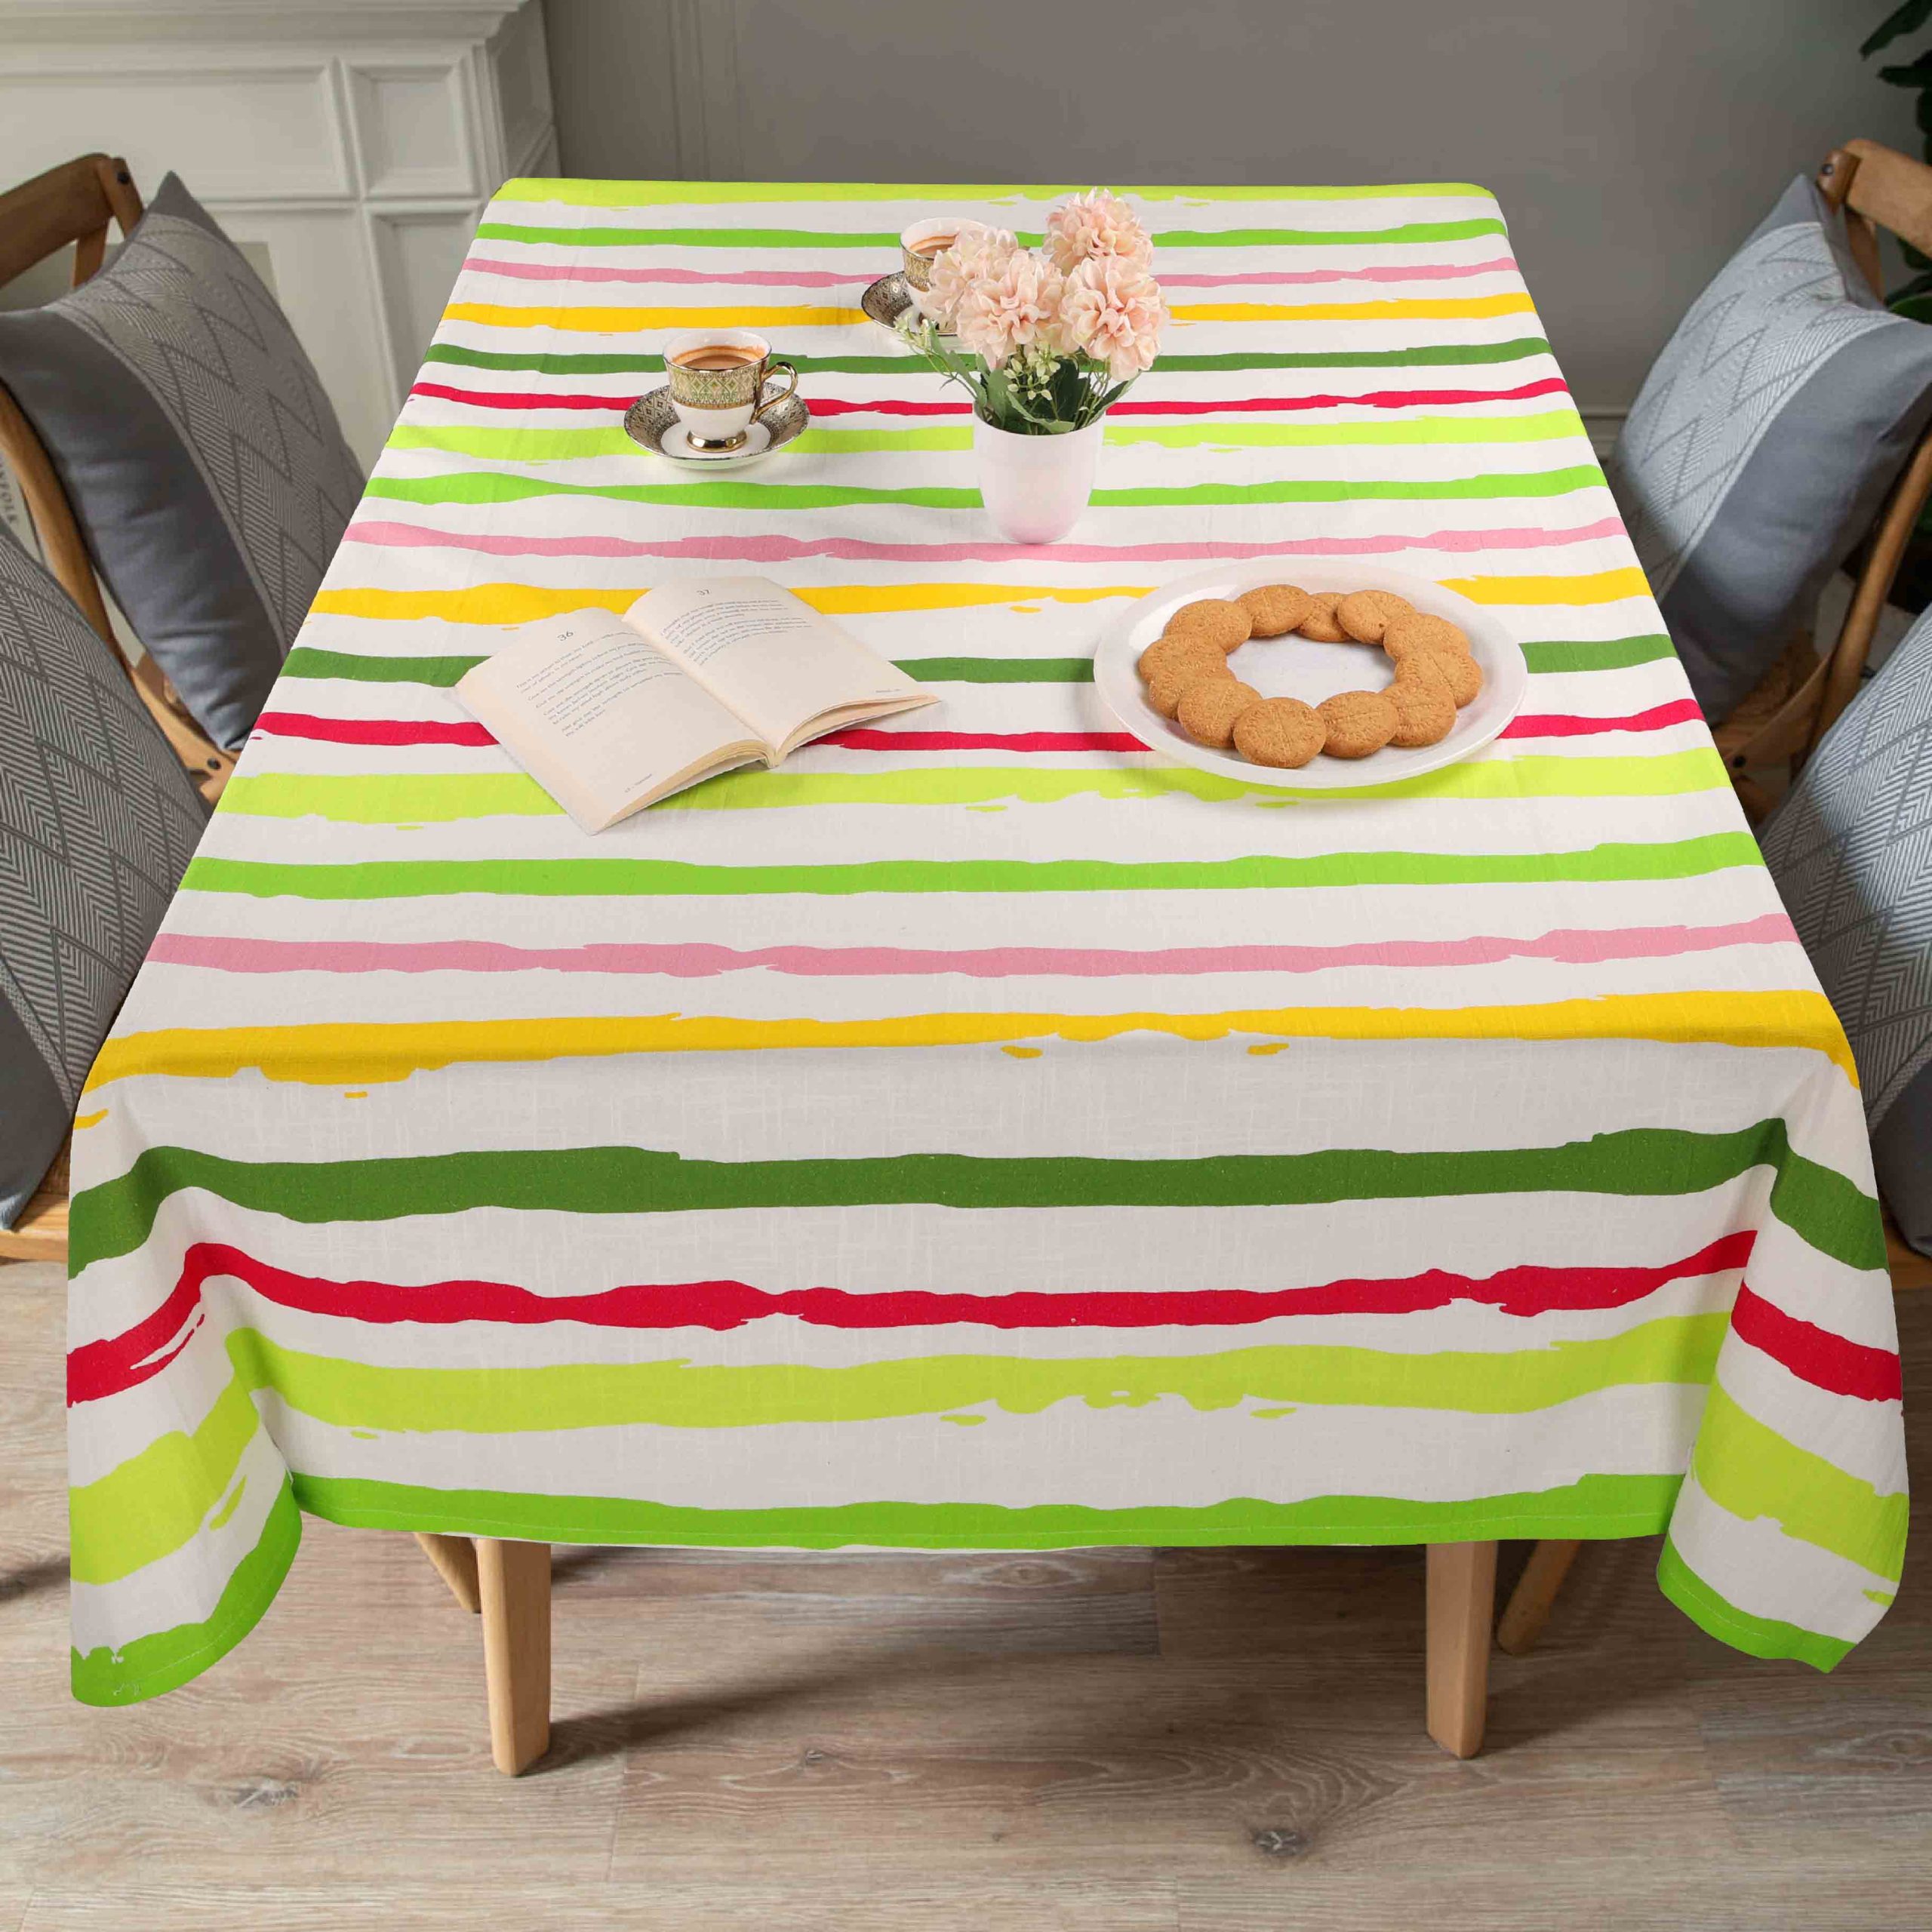 Buy Table Cloths Online, Floral Table Cover, Table Linen Collection